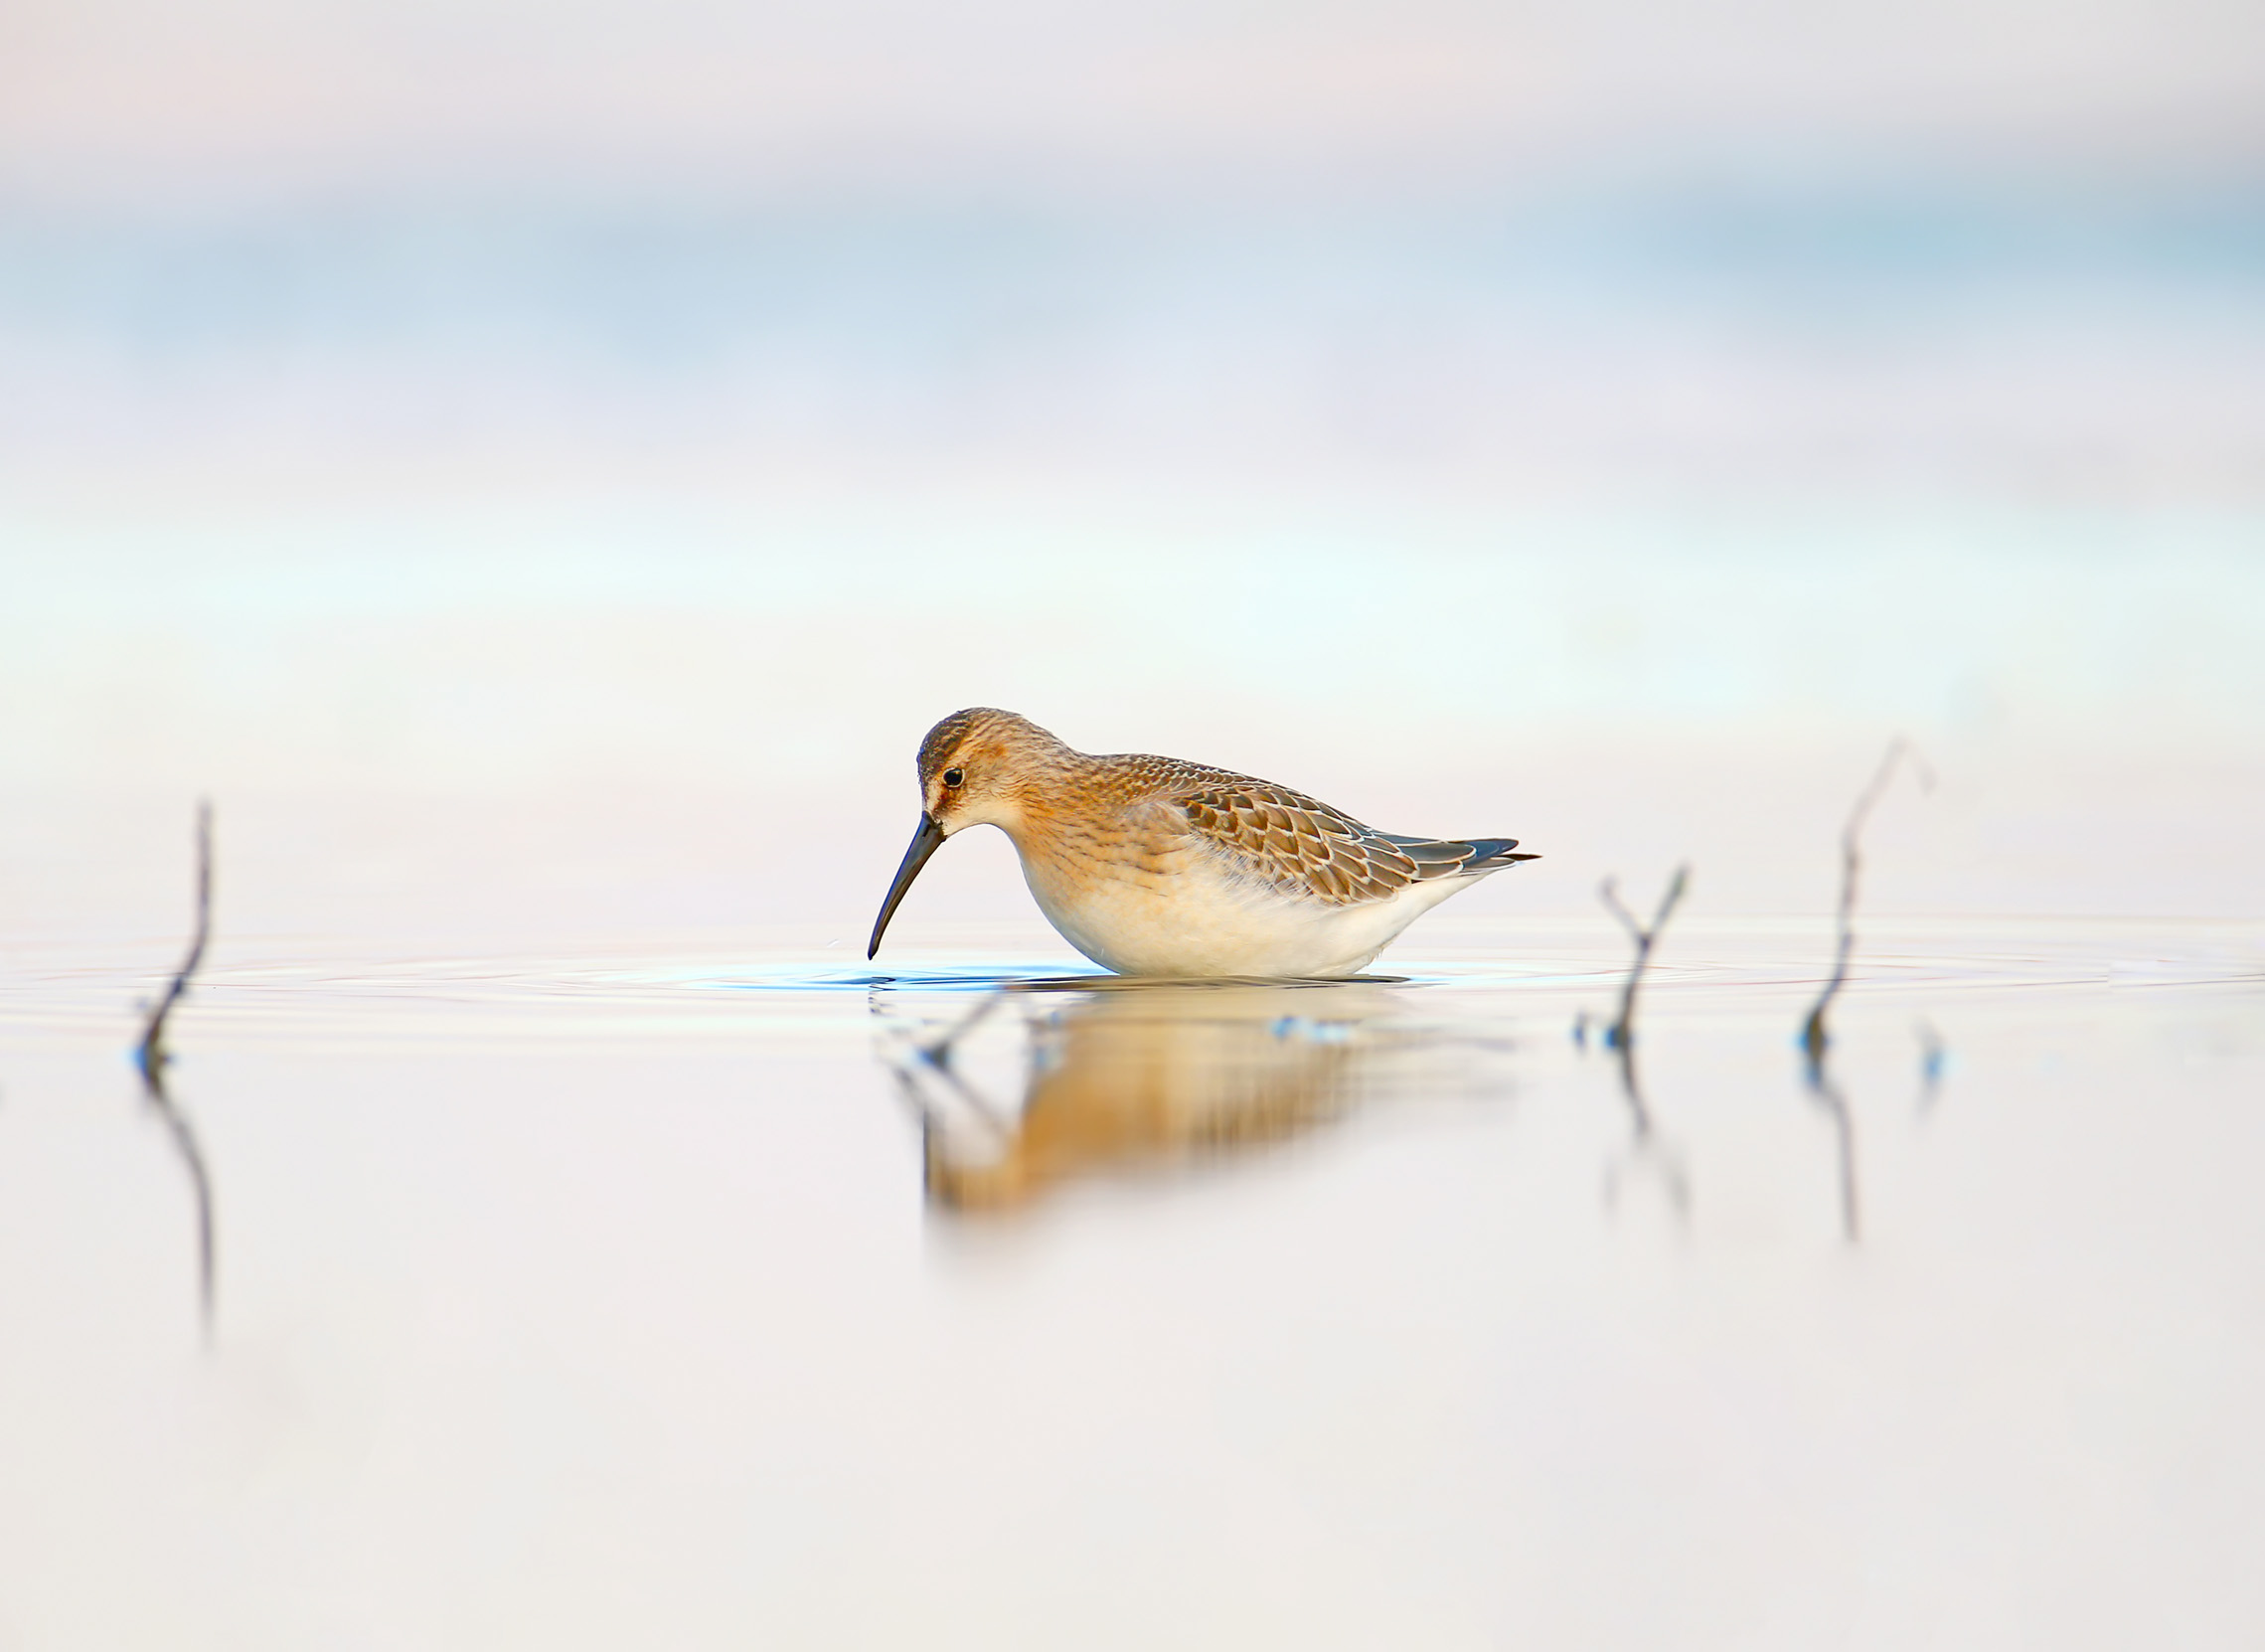 A Curlew Sandpiper stood in the water of the estuary in the soft morning light.